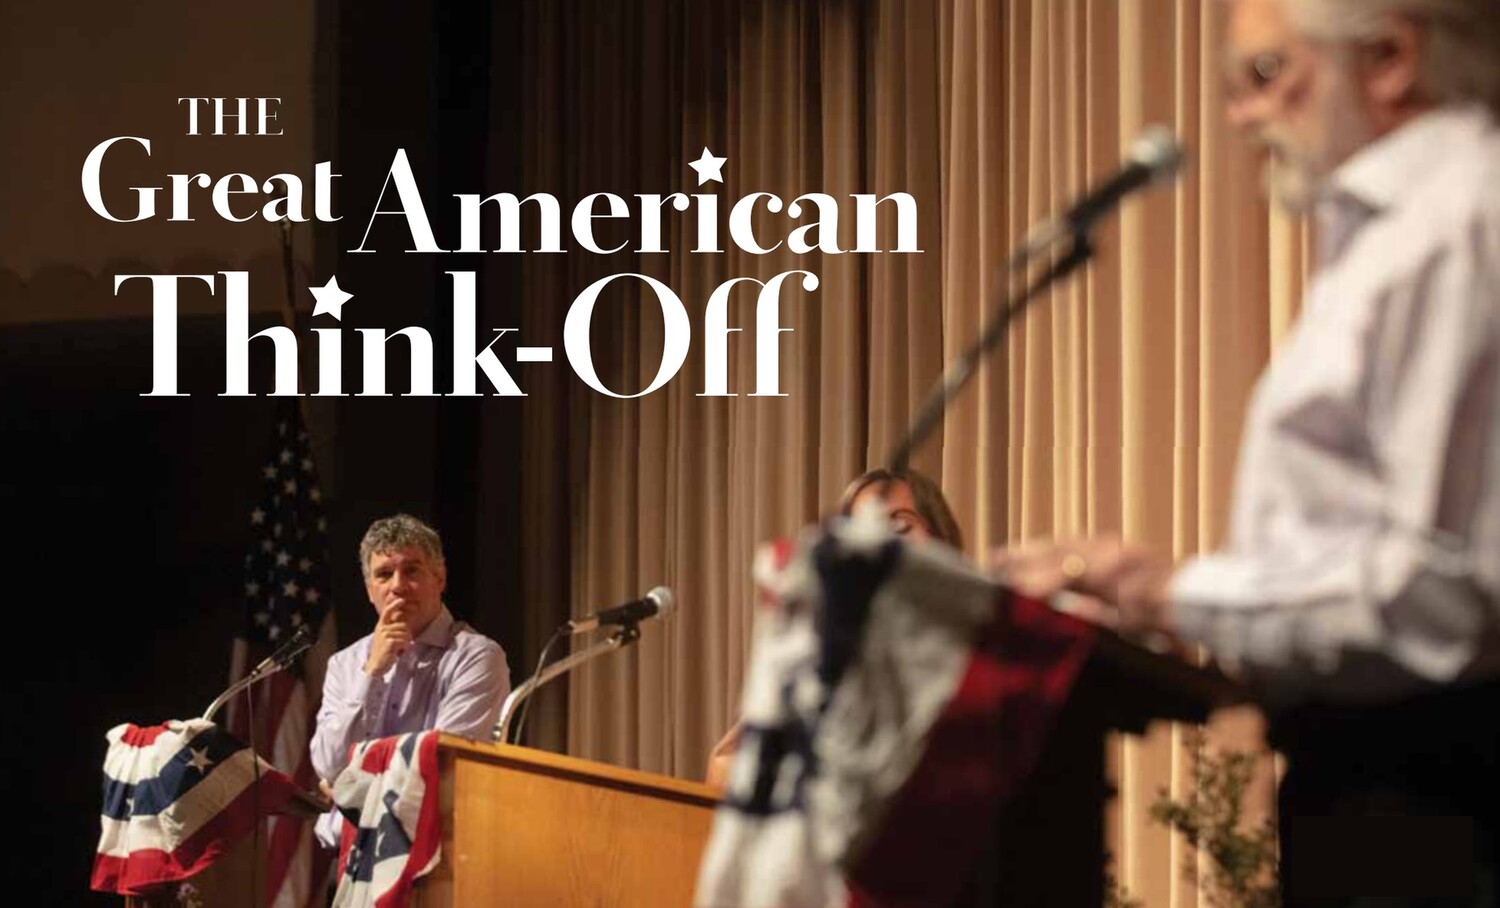 The Great American Think-Off